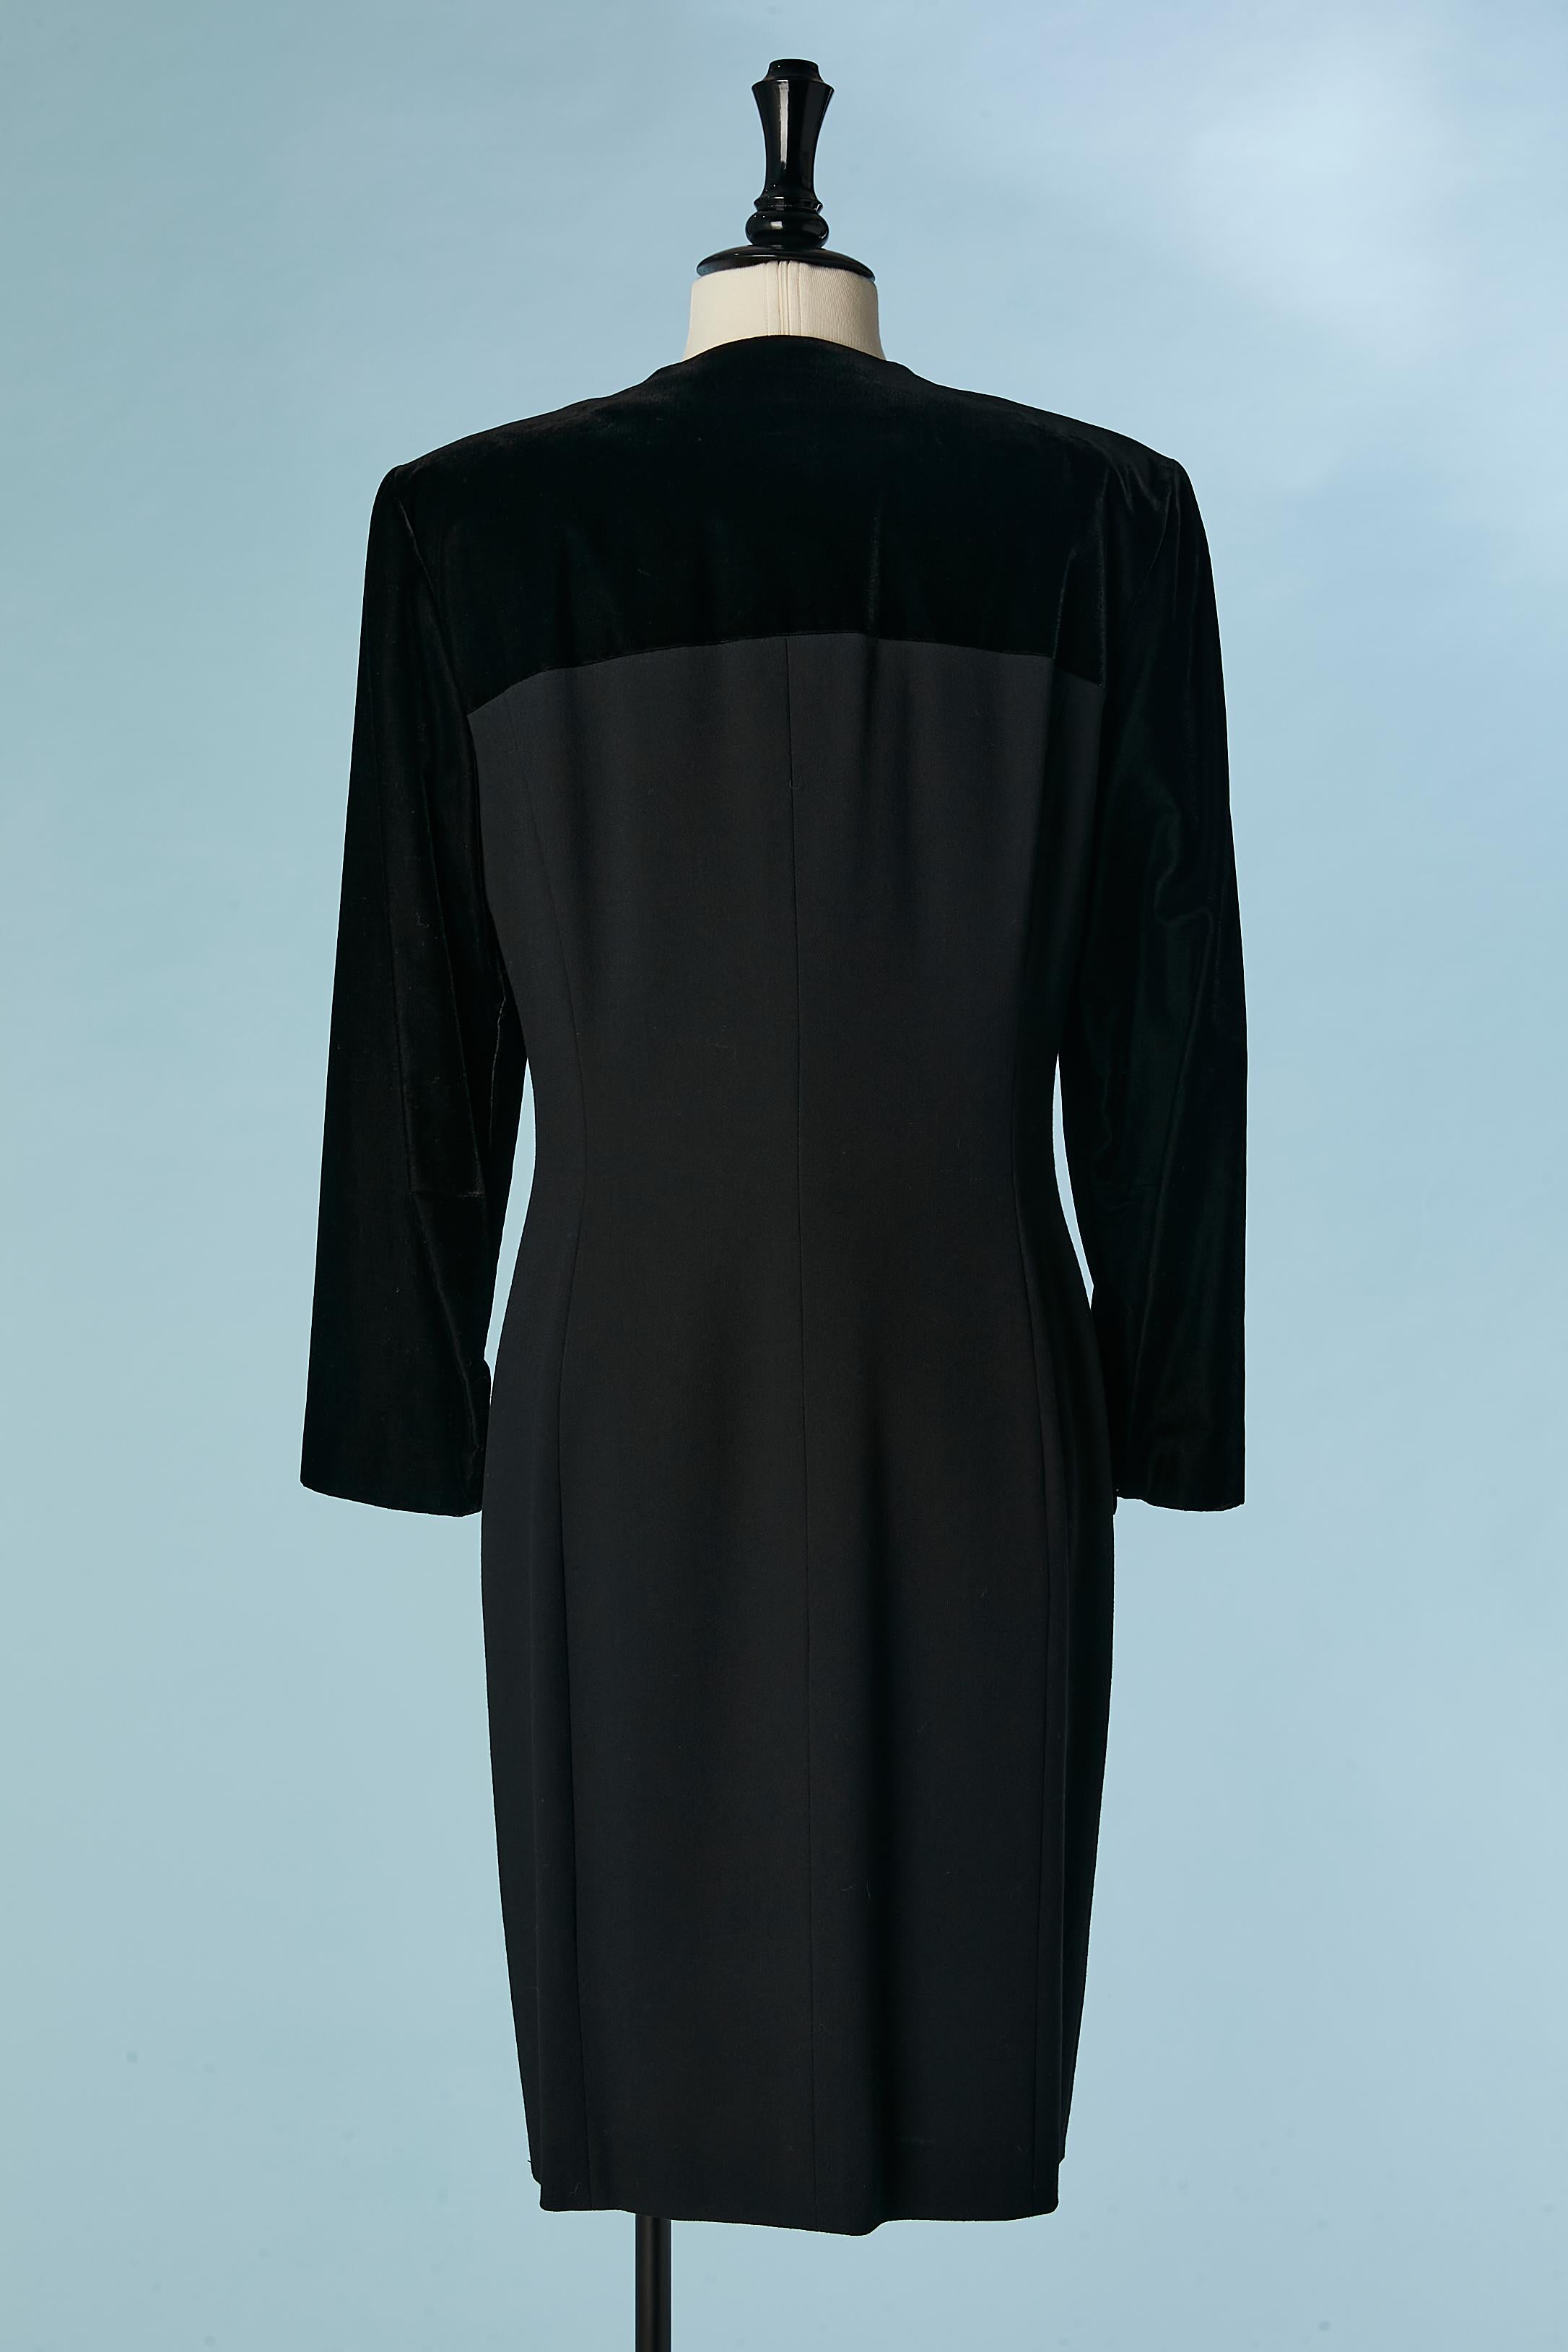 Black velvet and wool cocktail dress Escada Couture Circa 1980's For Sale 1